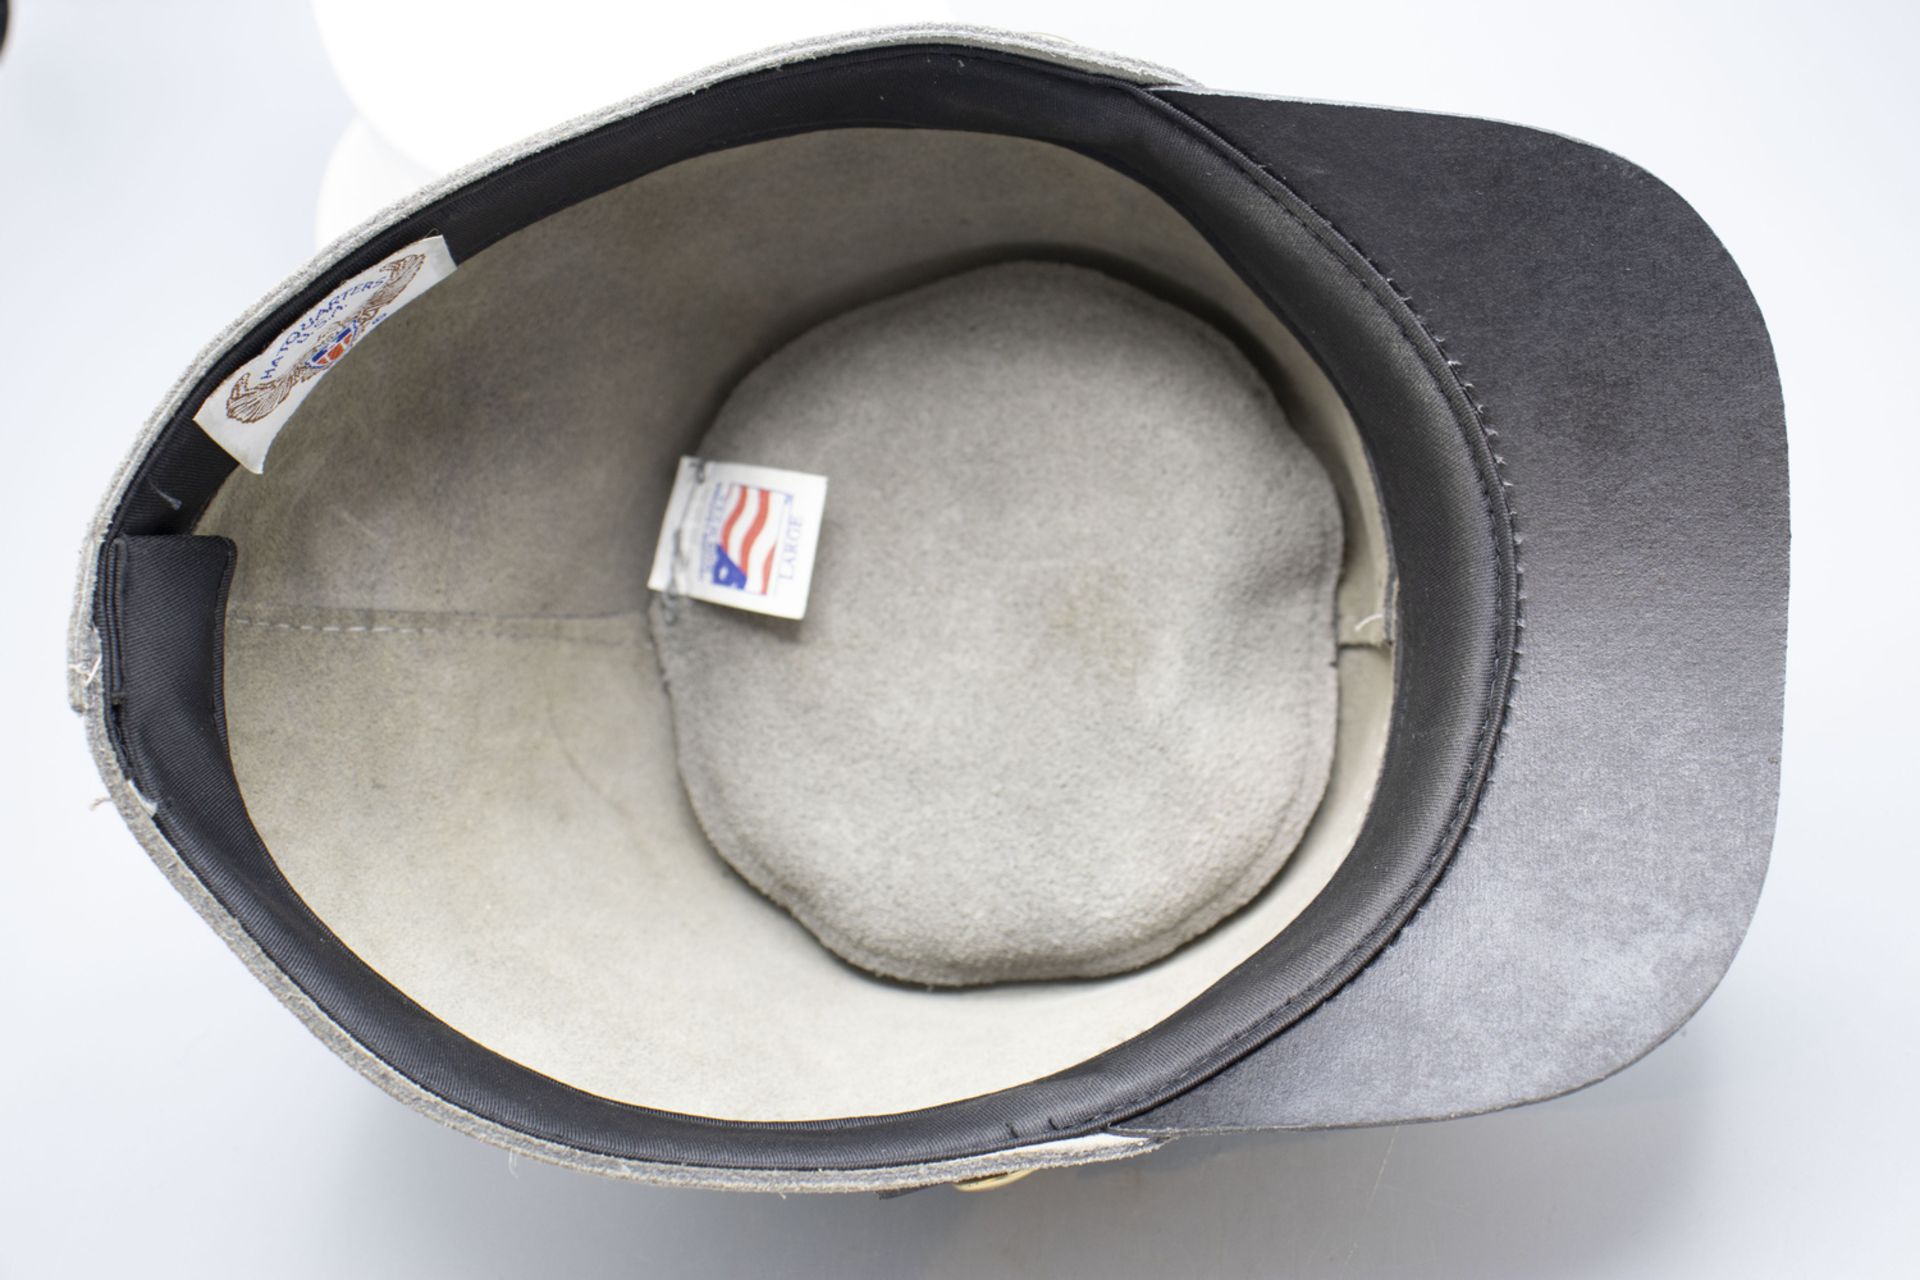 Schirmmütze / A peaked cap, Hat Quaters USA - Image 5 of 5